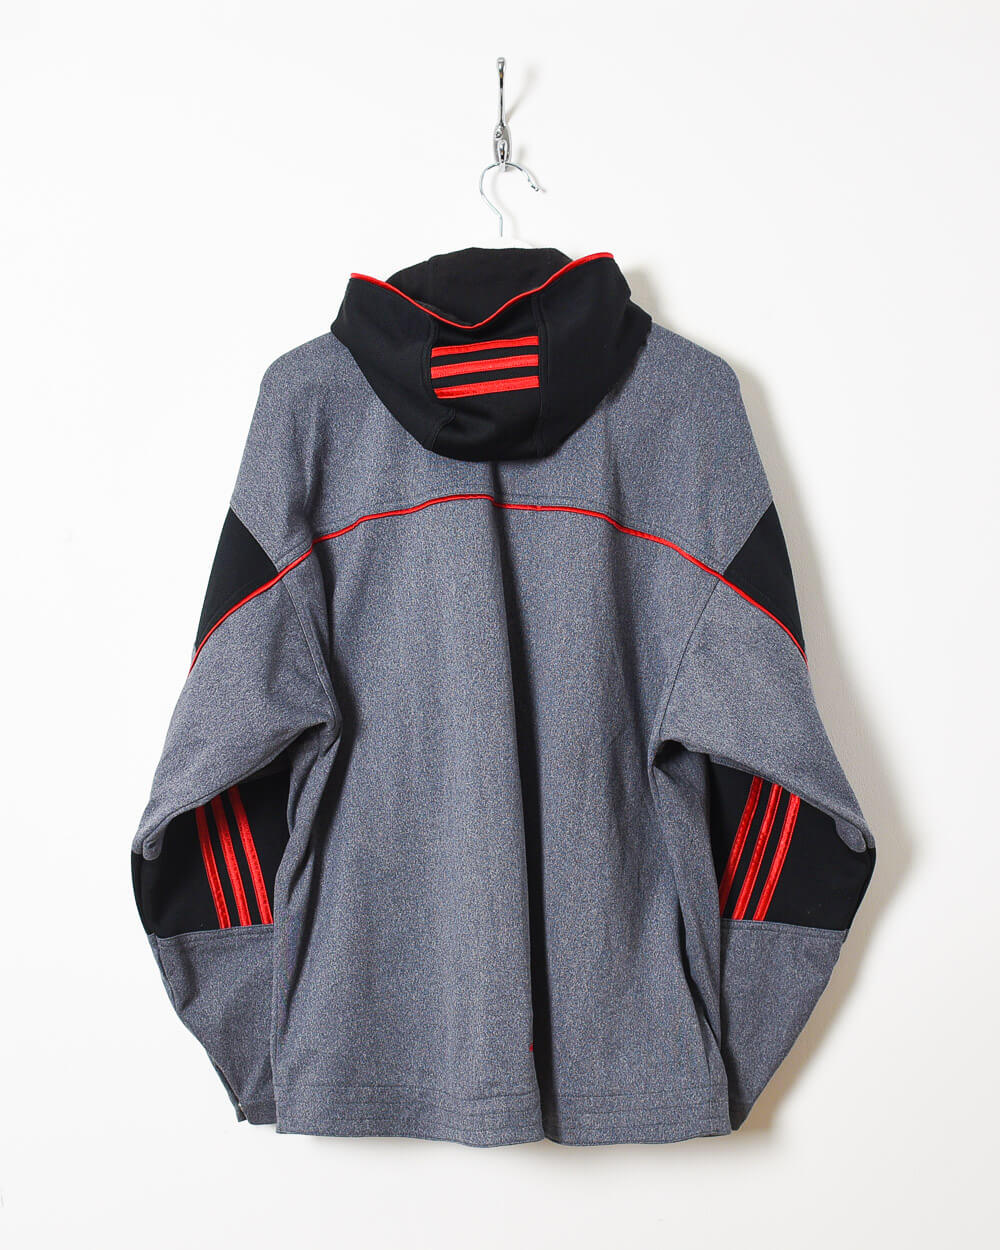 Grey Adidas Hooded Tracksuit Top - Large